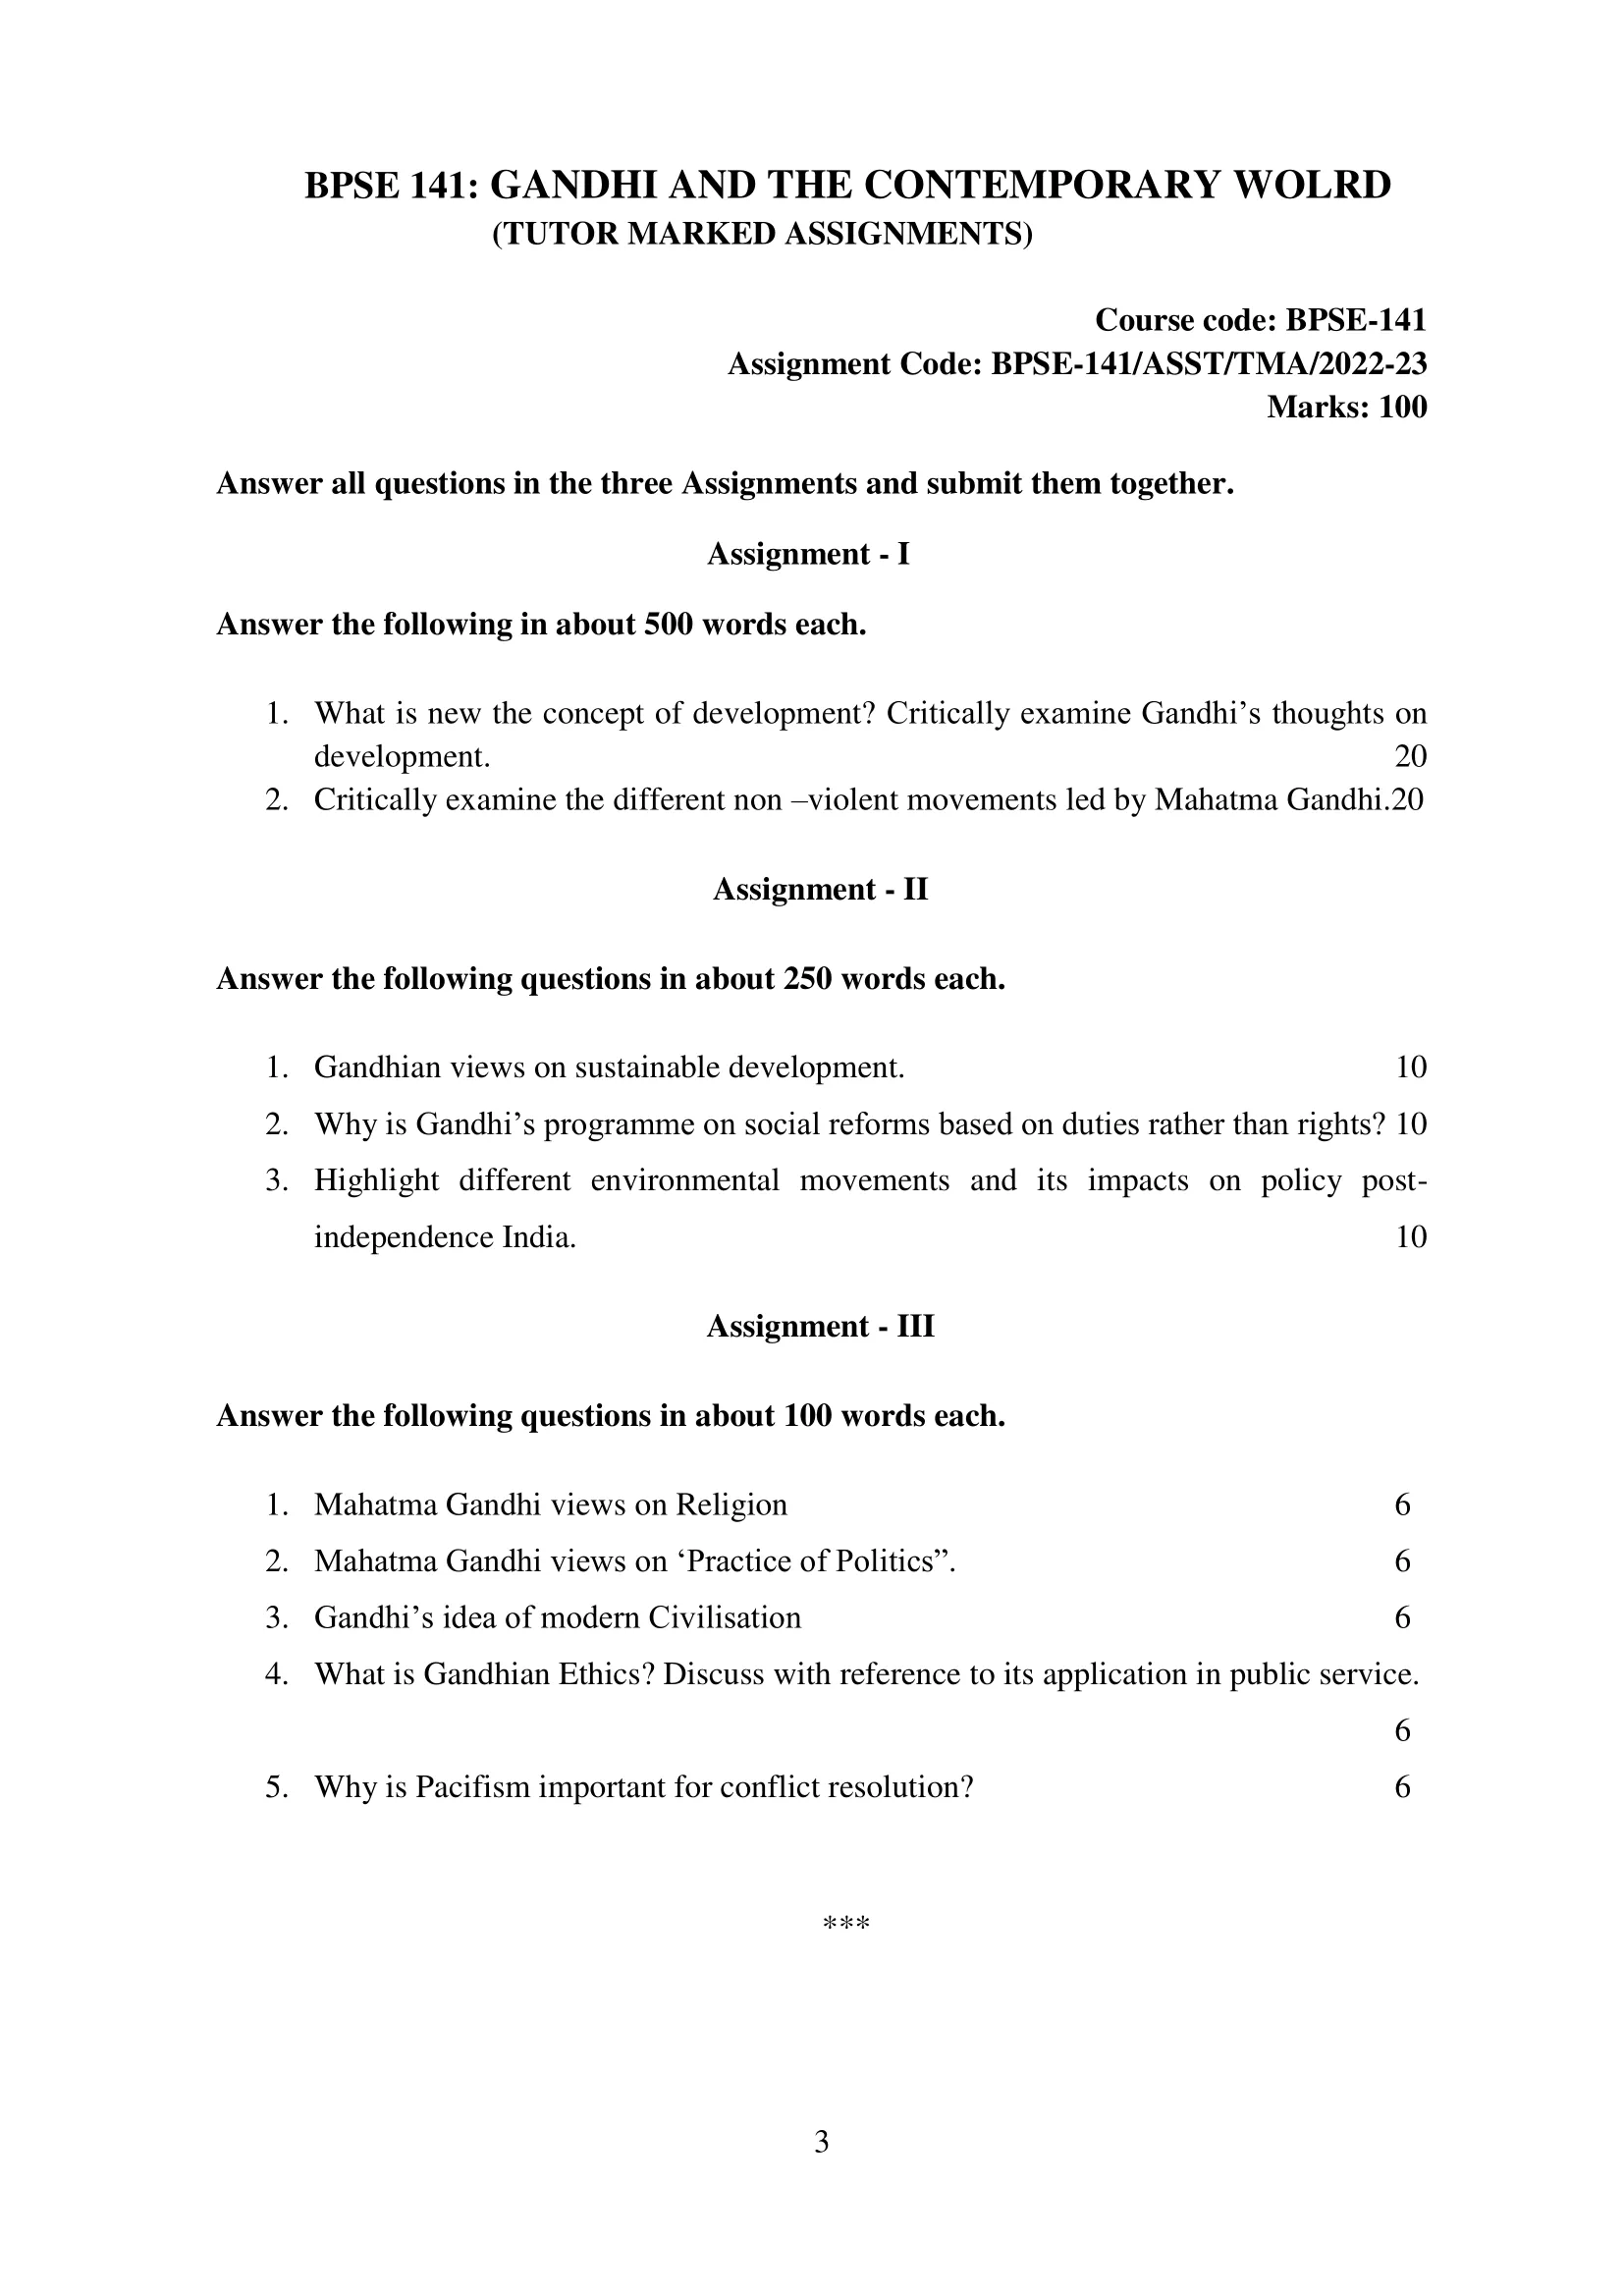 BPSE 141 IGNOU Solved Assignment 2022-2023 GANDHI AND THE CONTEMPORARY WOLRD